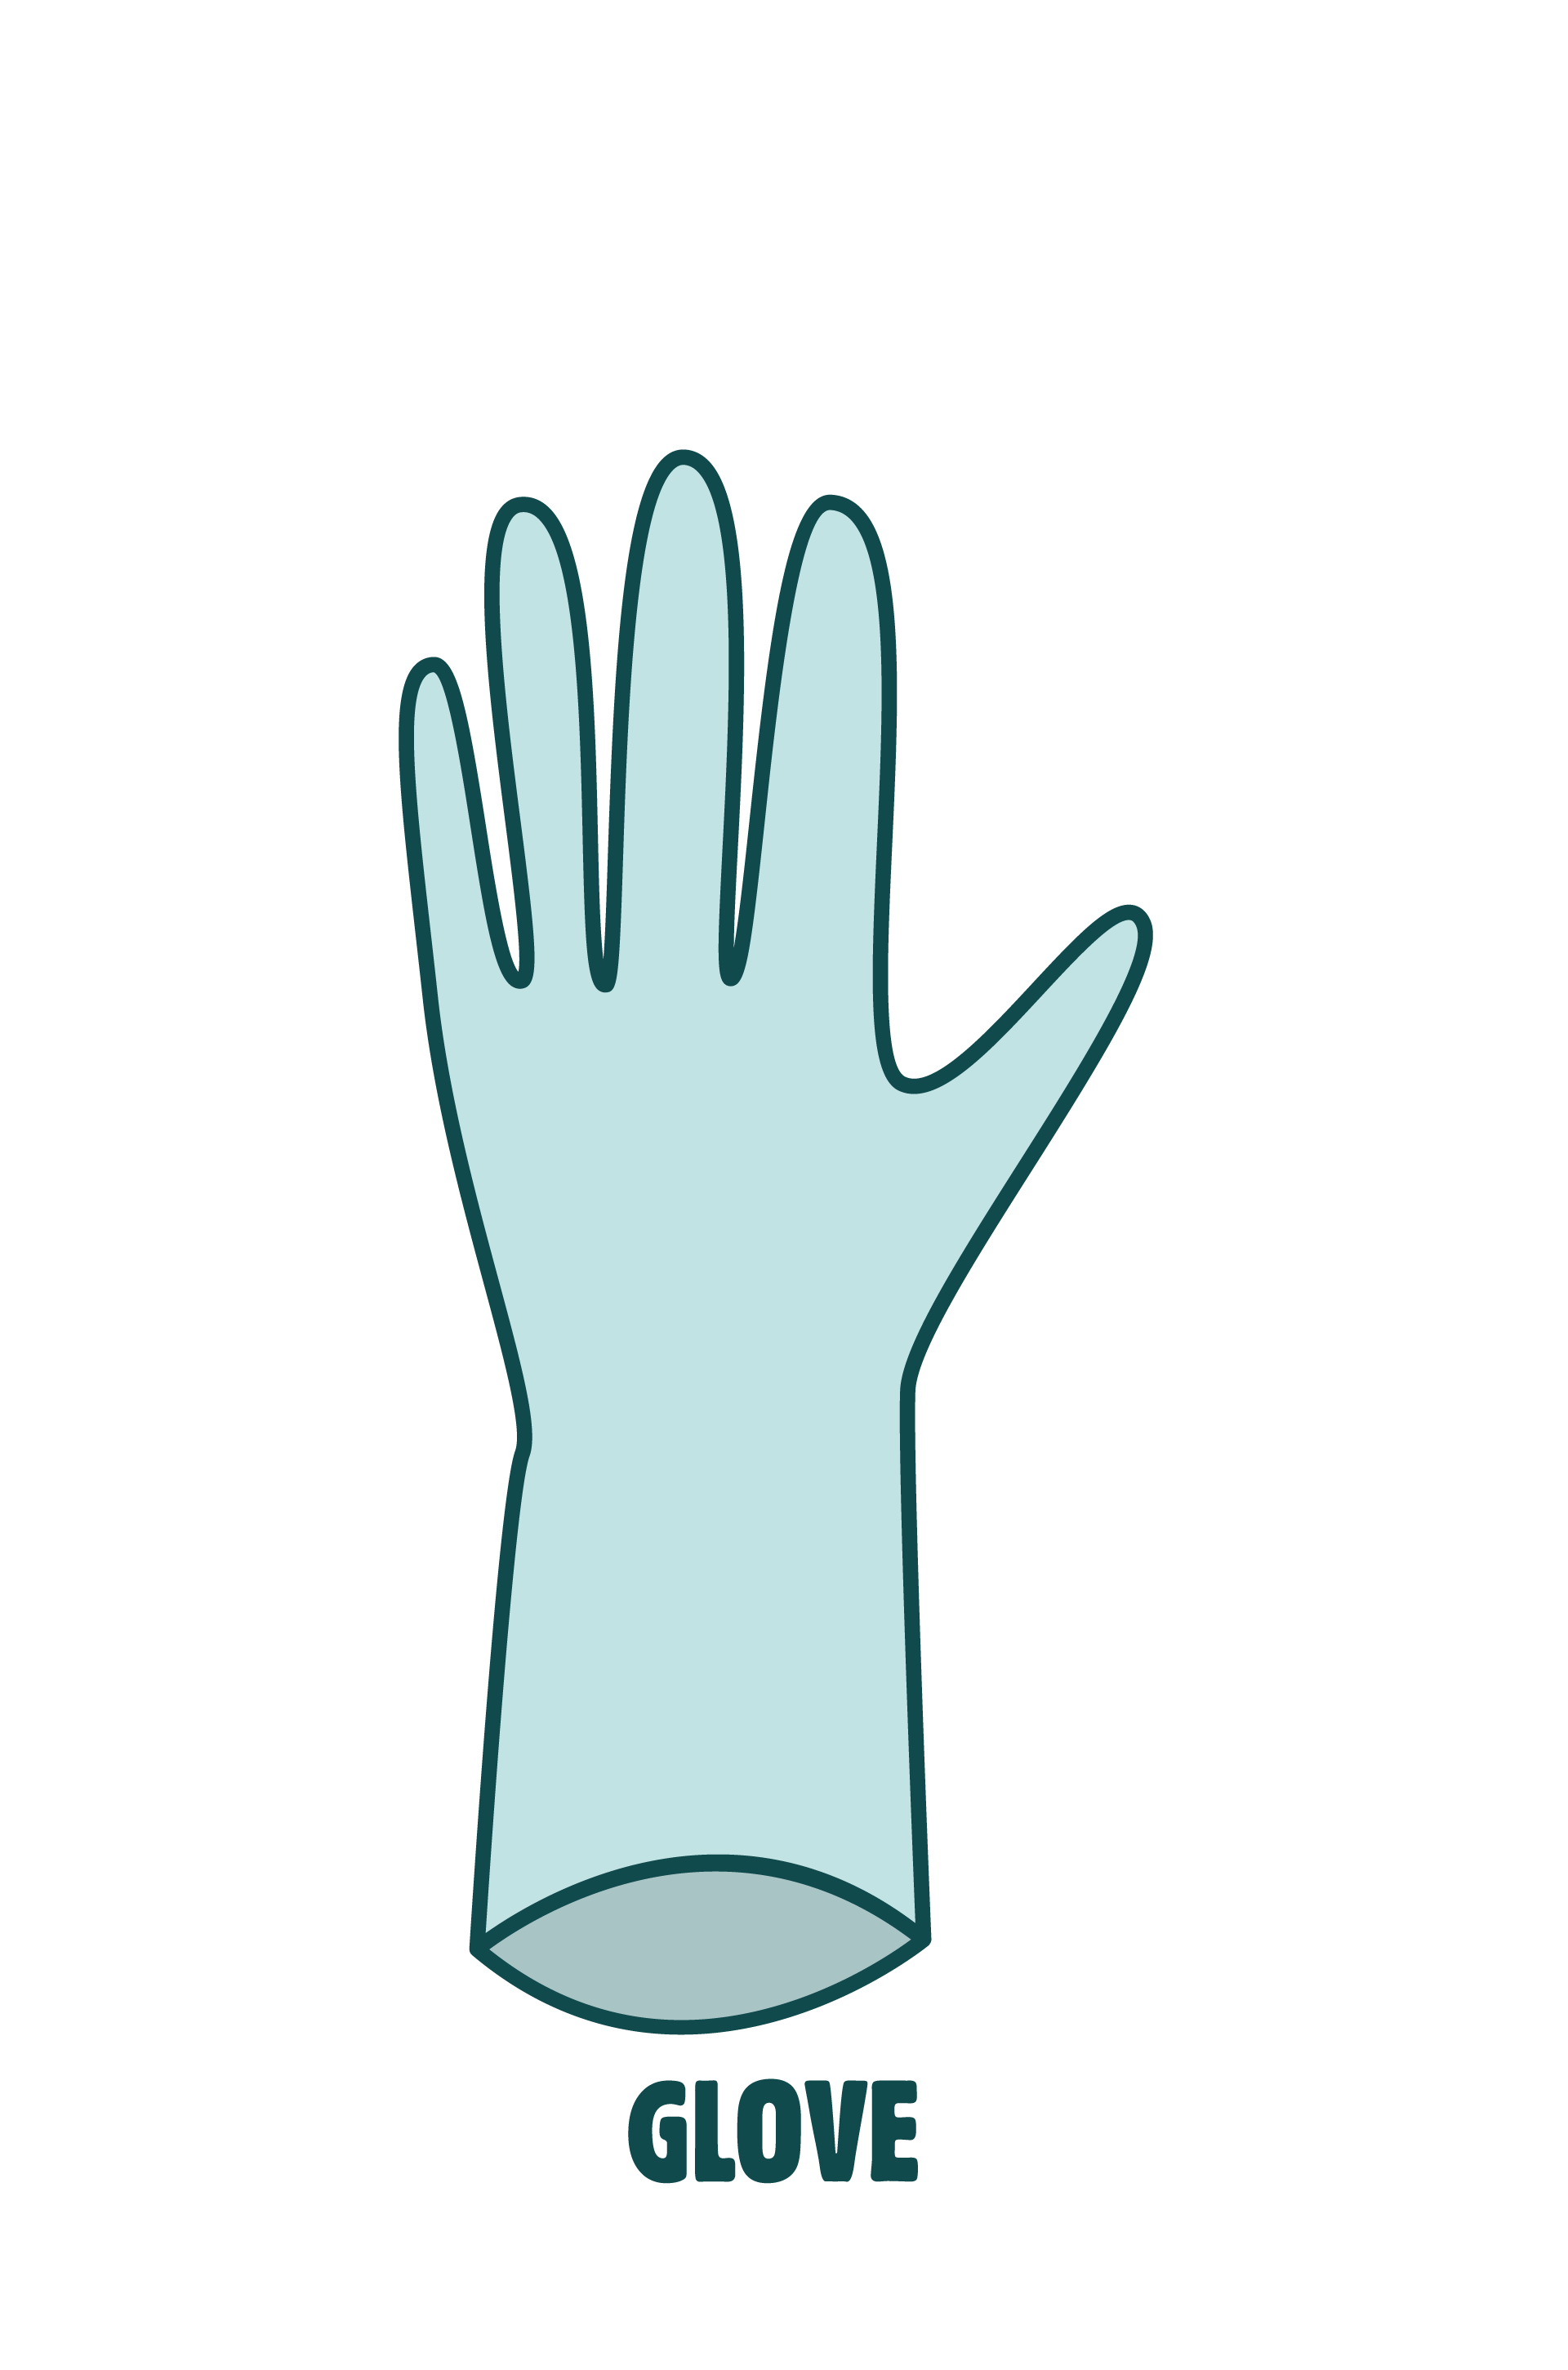 Glove, latex, contraception, prevention, protect, STI, screening, STD, sexually transmitted infection, unsafe sex